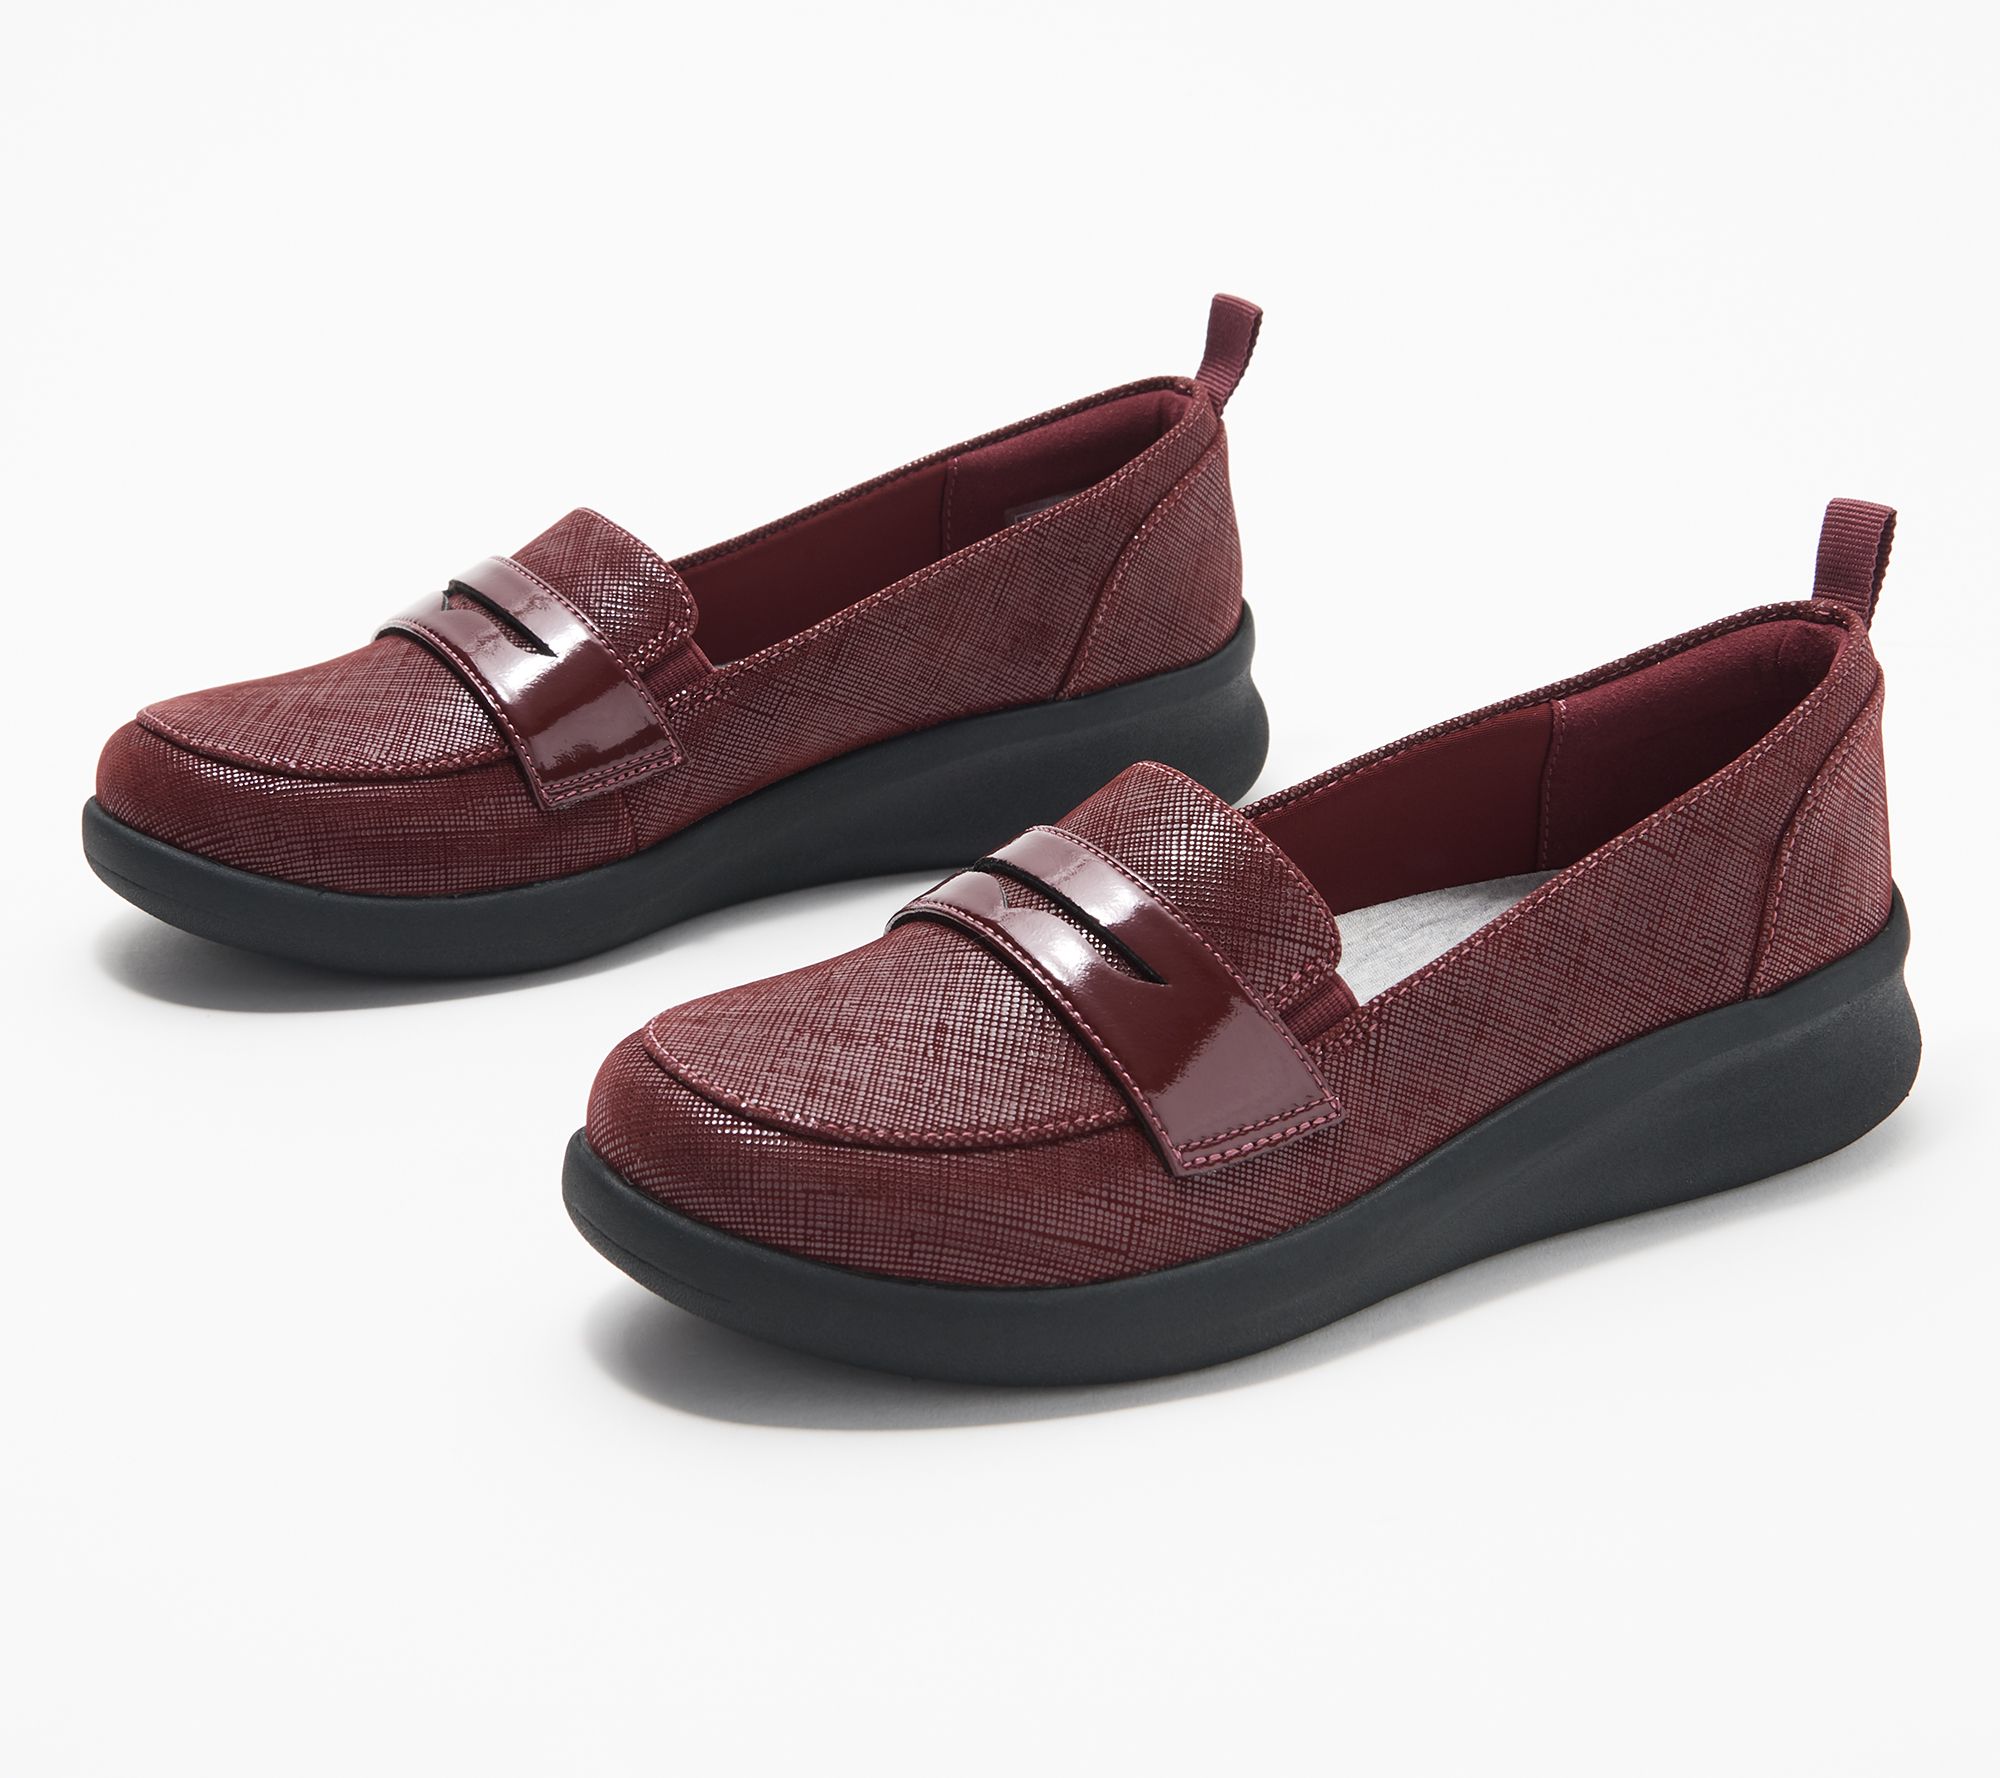 cloudsteppers by clarks qvc